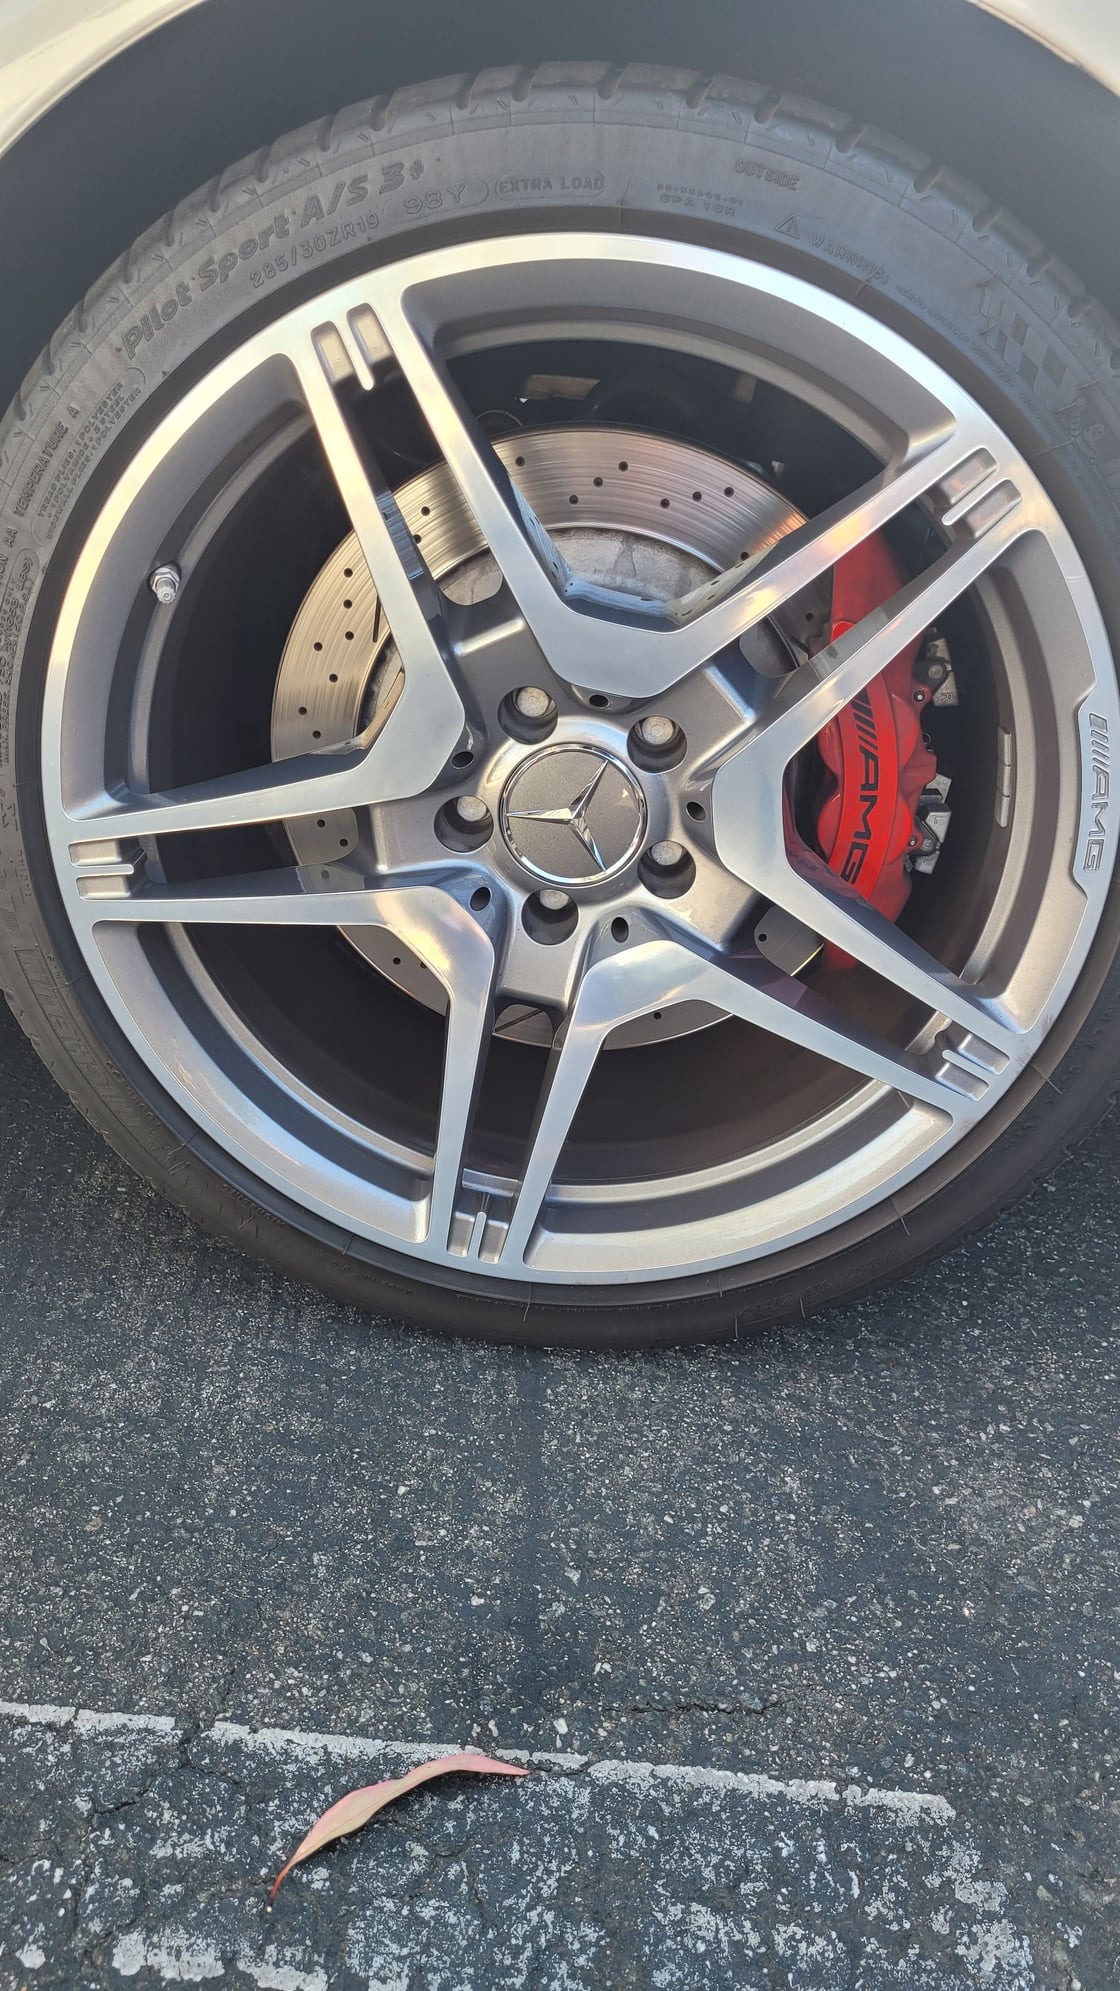 Wheels and Tires/Axles - OEM CLS63 Wheels/Tires - Used - 2014 Mercedes-Benz CLS63 AMG S - Costa Mesa, CA 92627, United States